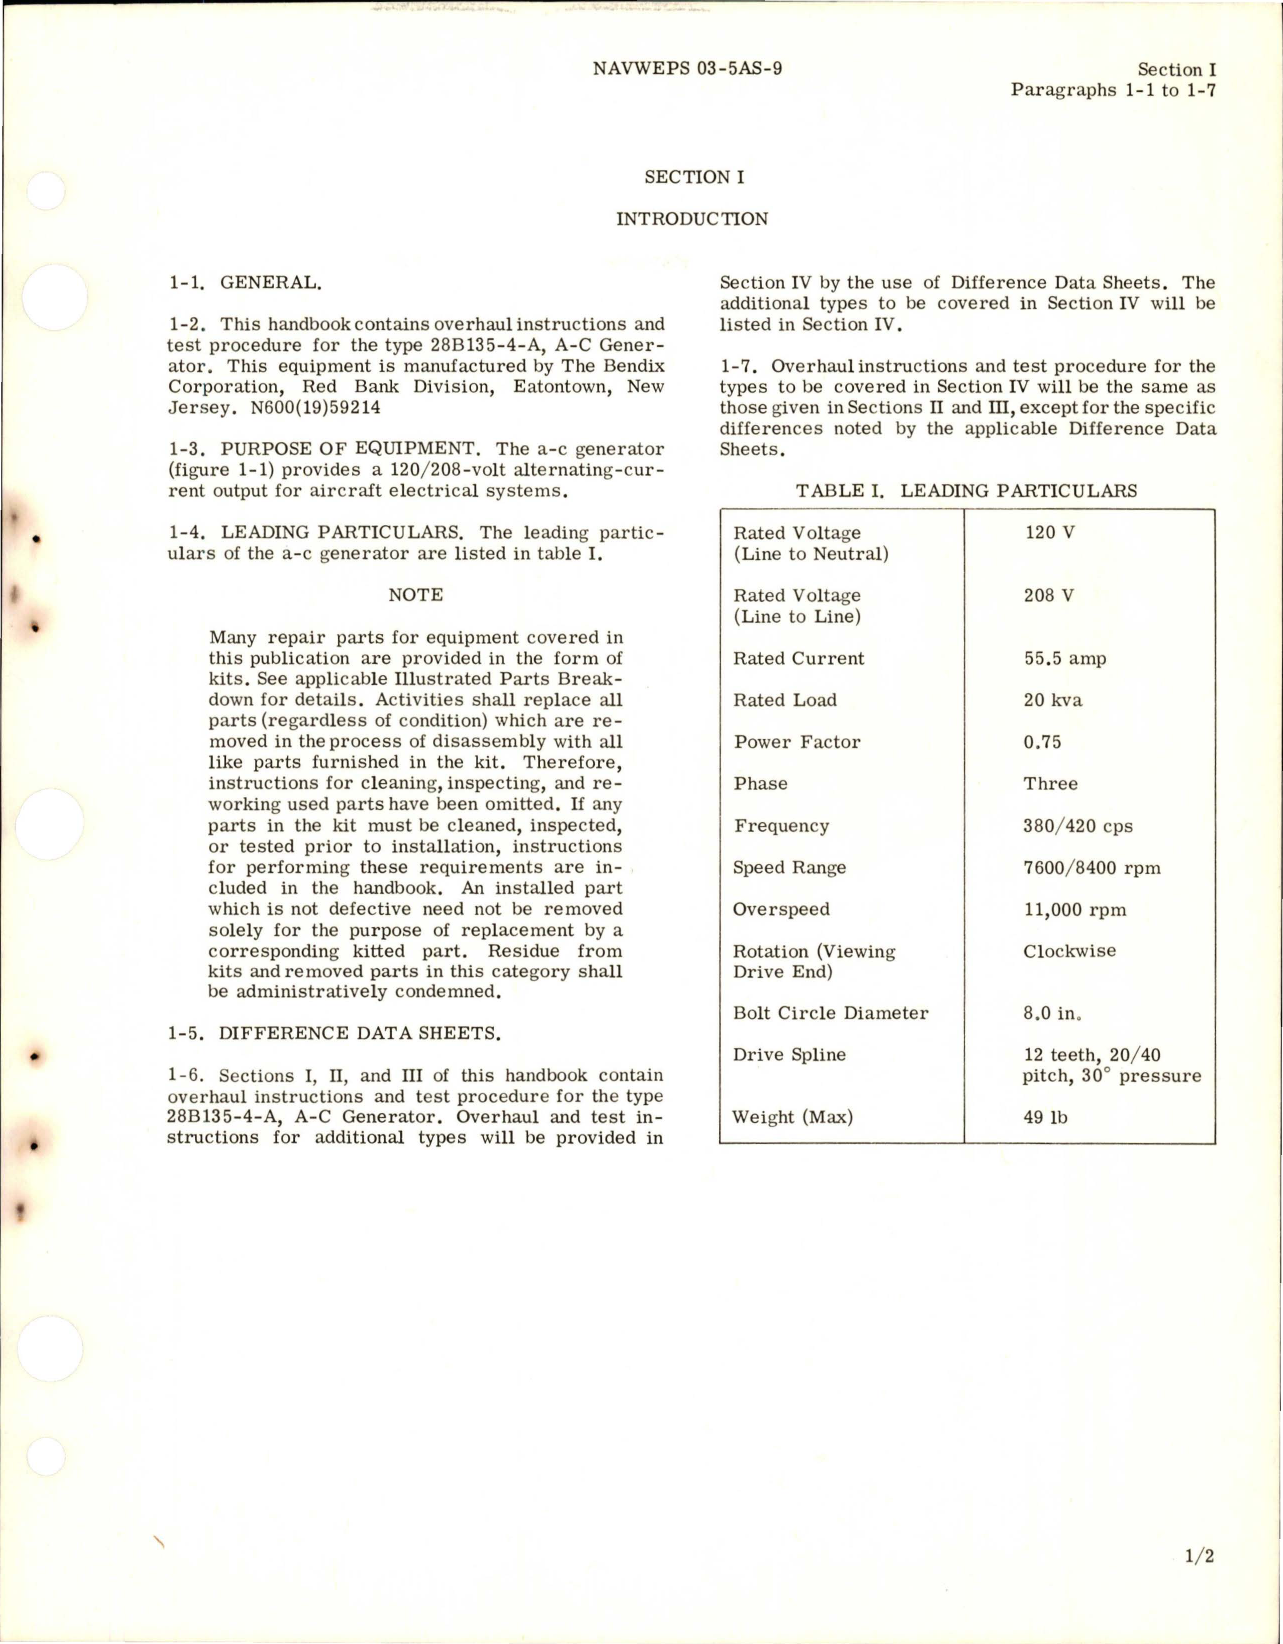 Sample page 5 from AirCorps Library document: Overhaul Instructions for AC Generator - Type 28B135-4-A